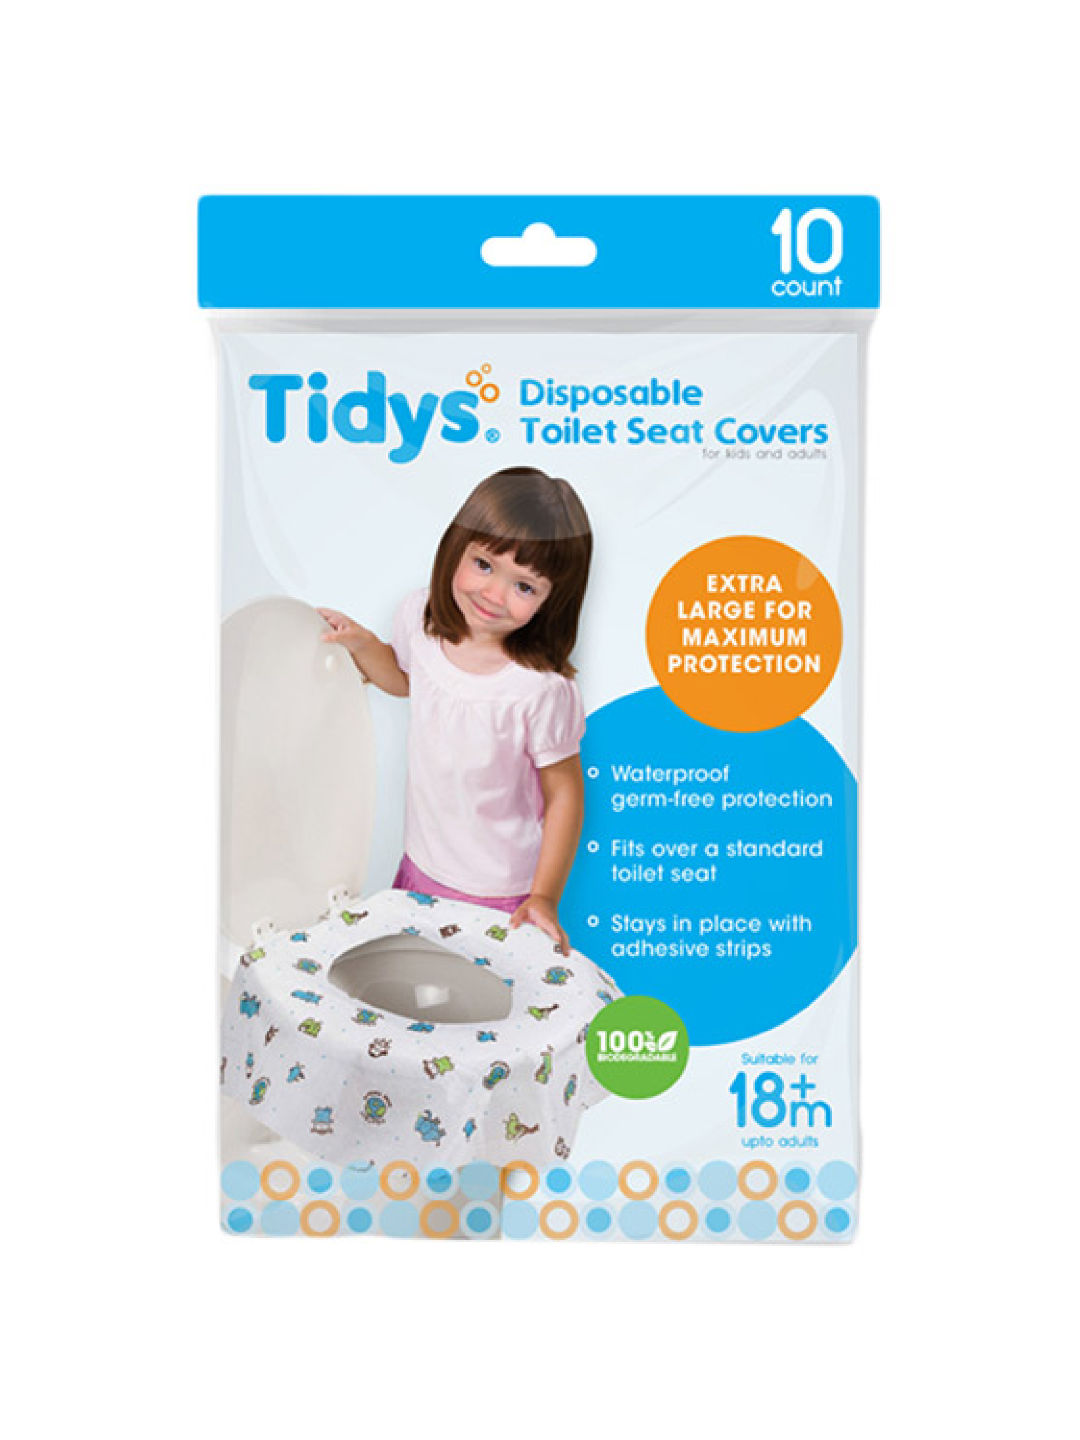 Tidys Disposable Toilet Seat Covers - Bundle of 10